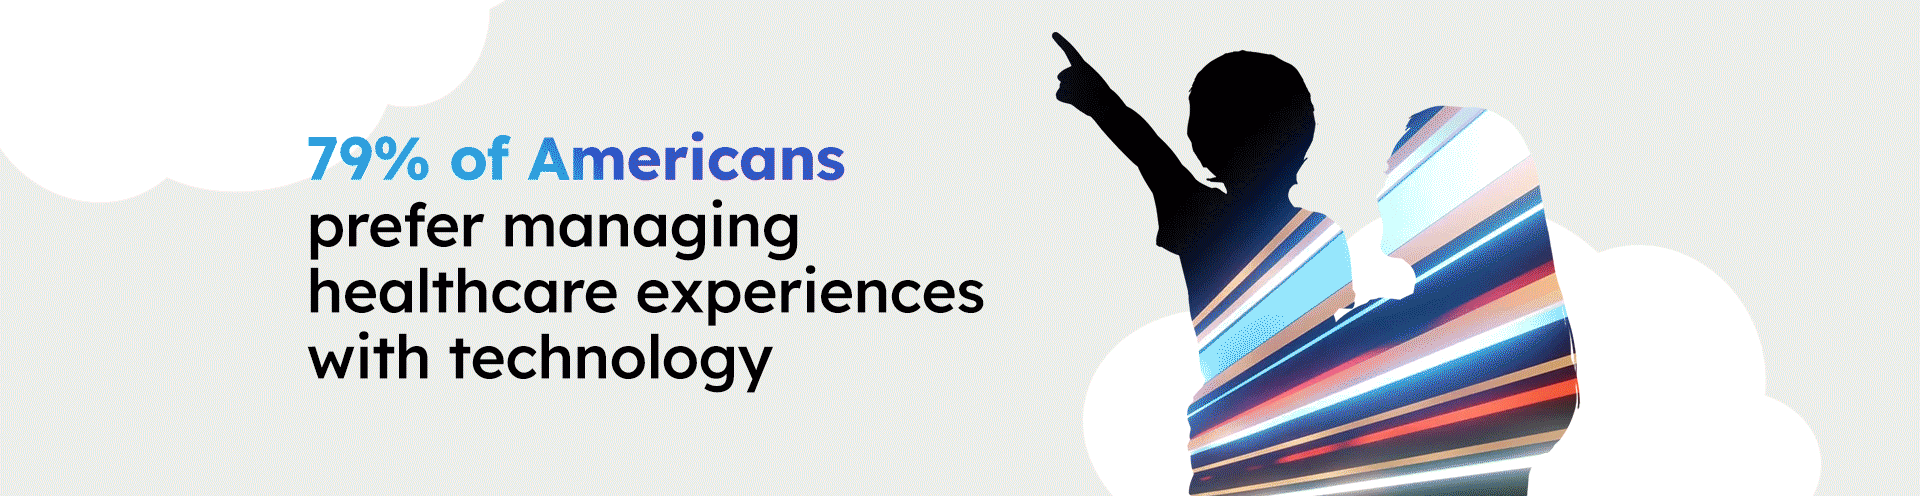 79% of Americans prefer managing healthcare experiences with technology